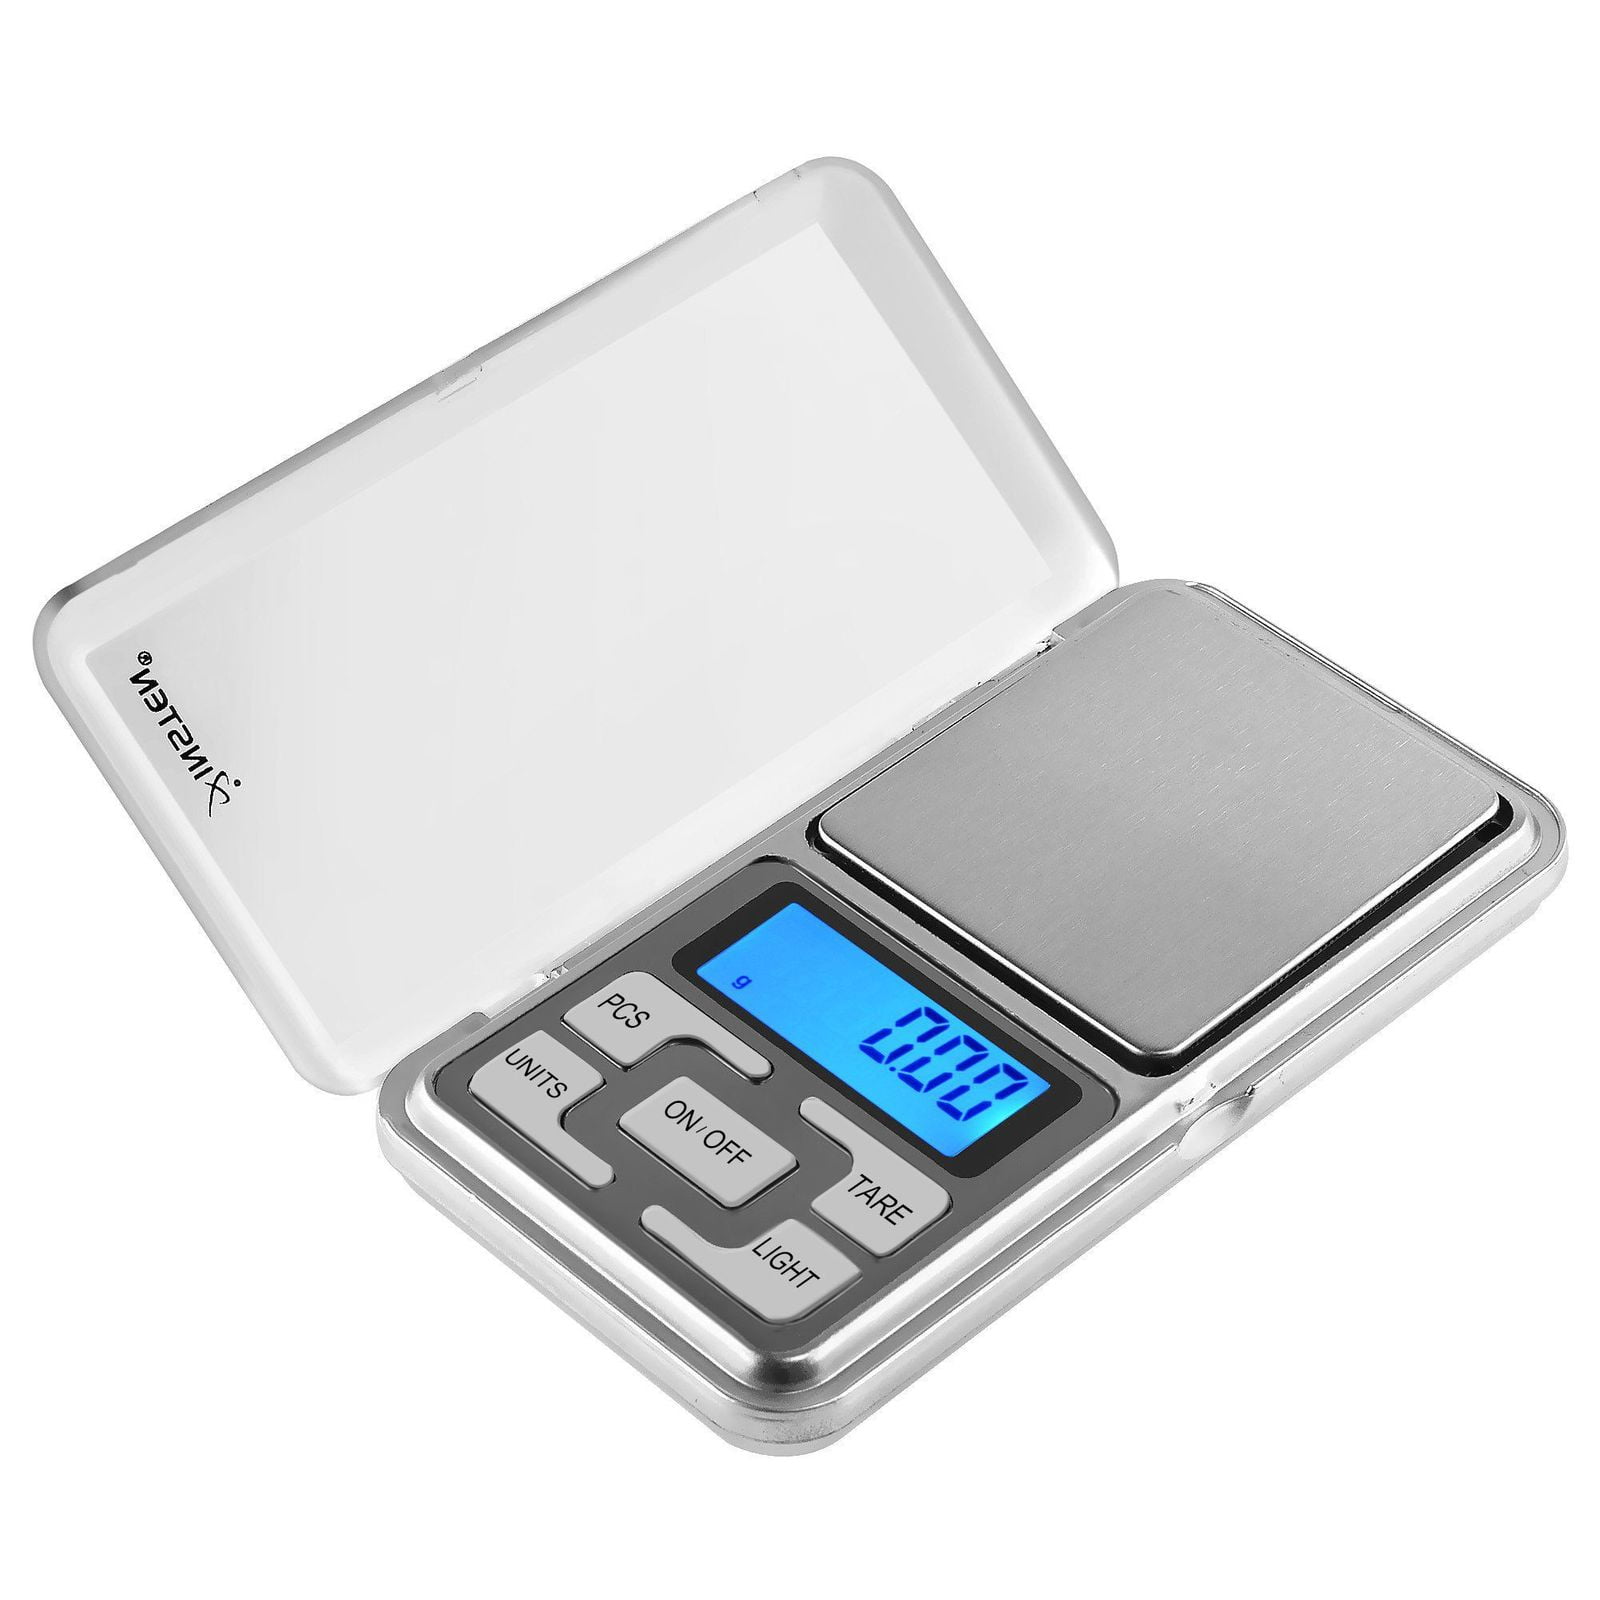 Insten Pocket Jewelry Scale Digital 0.01 g gram 200g Kitchen Food Small  Mini Scale Weight Scale, Tare Fuction, 4 unit selection: g tl oz ct -  Walmart.com